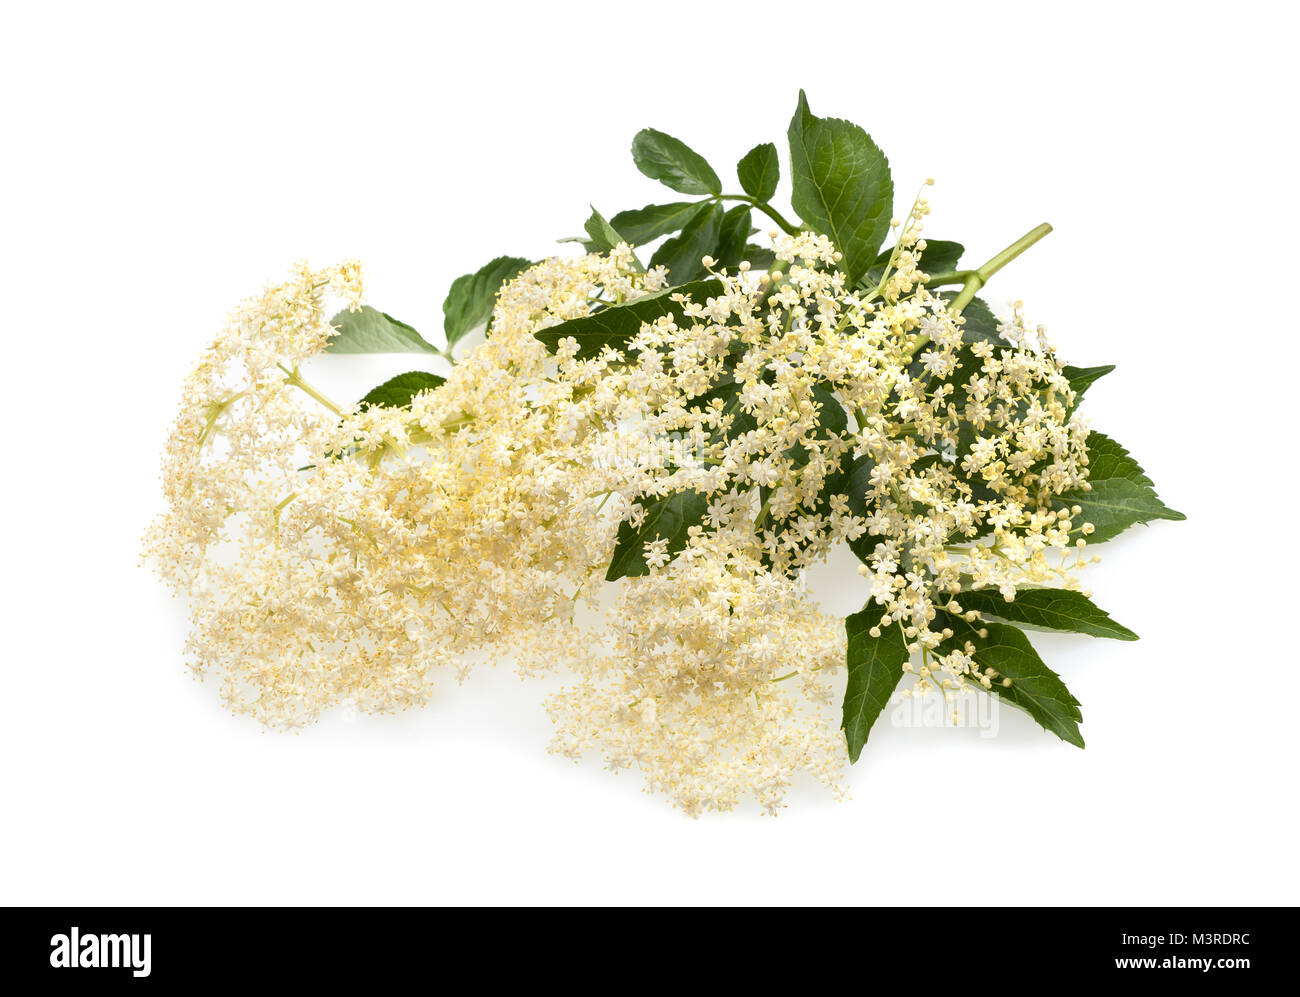 Elder flowers isolated on a white background Stock Photo